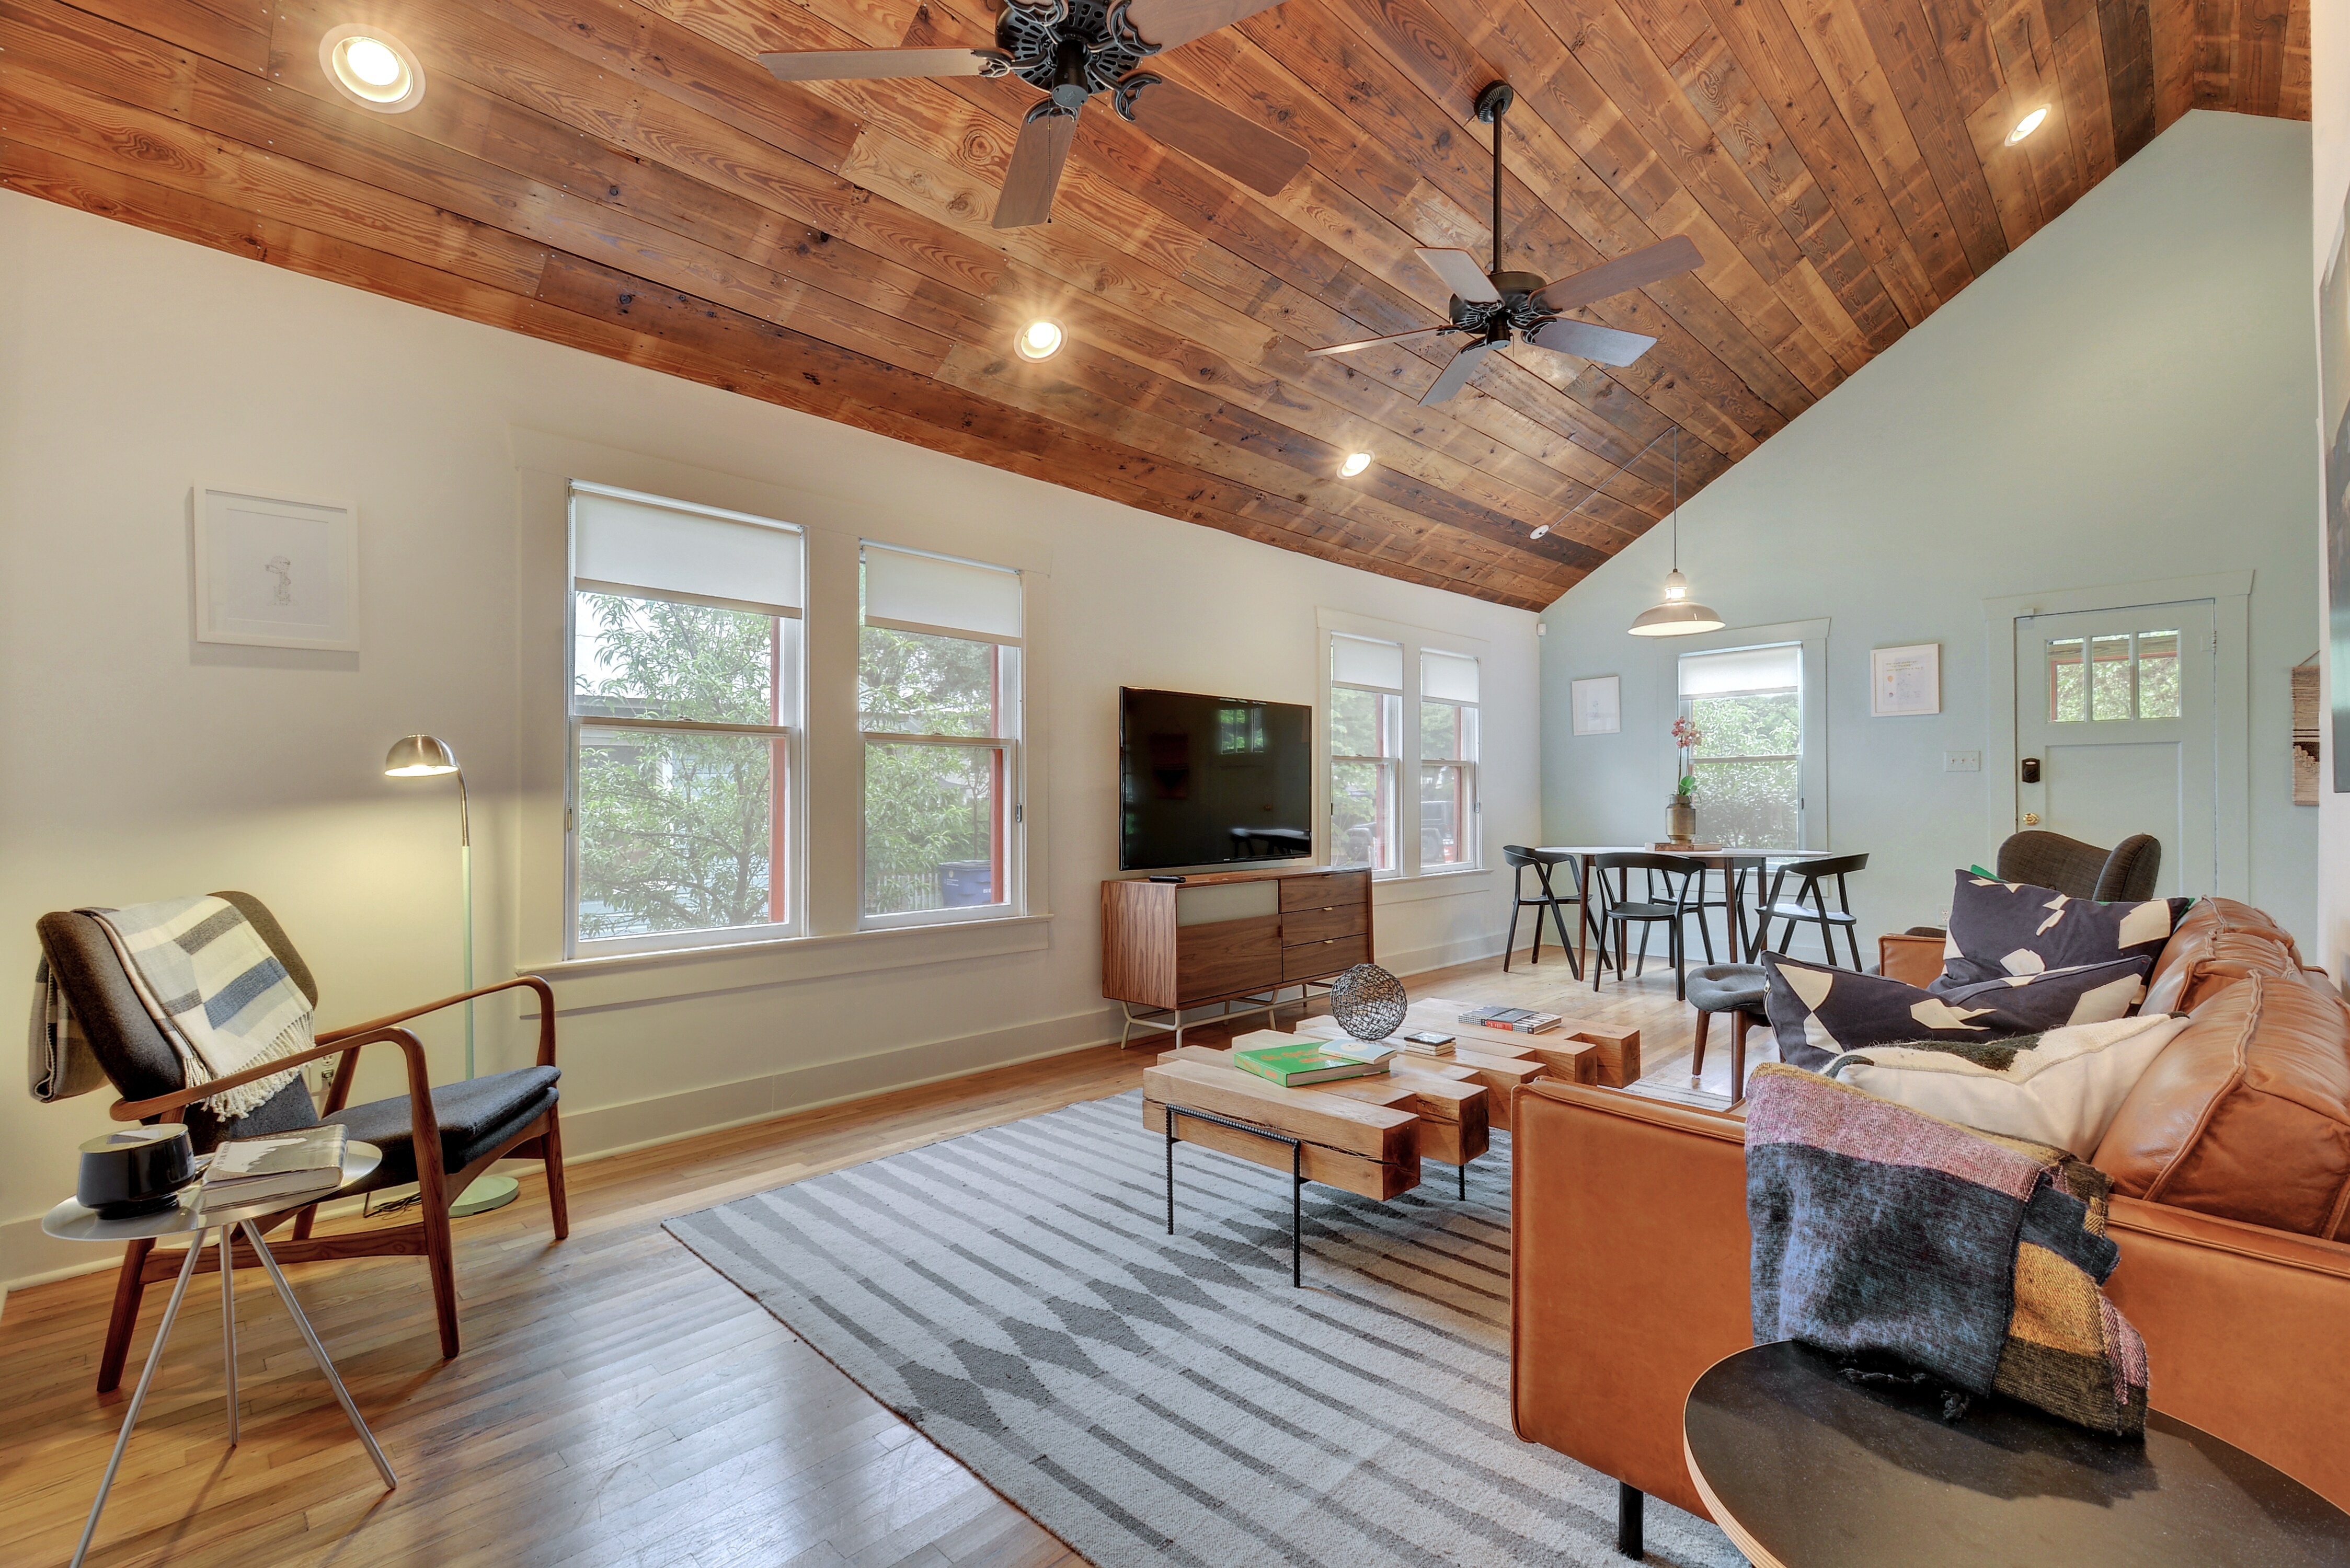 Welcome to Austin! This house is professionally managed by TurnKey Vacation Rentals.